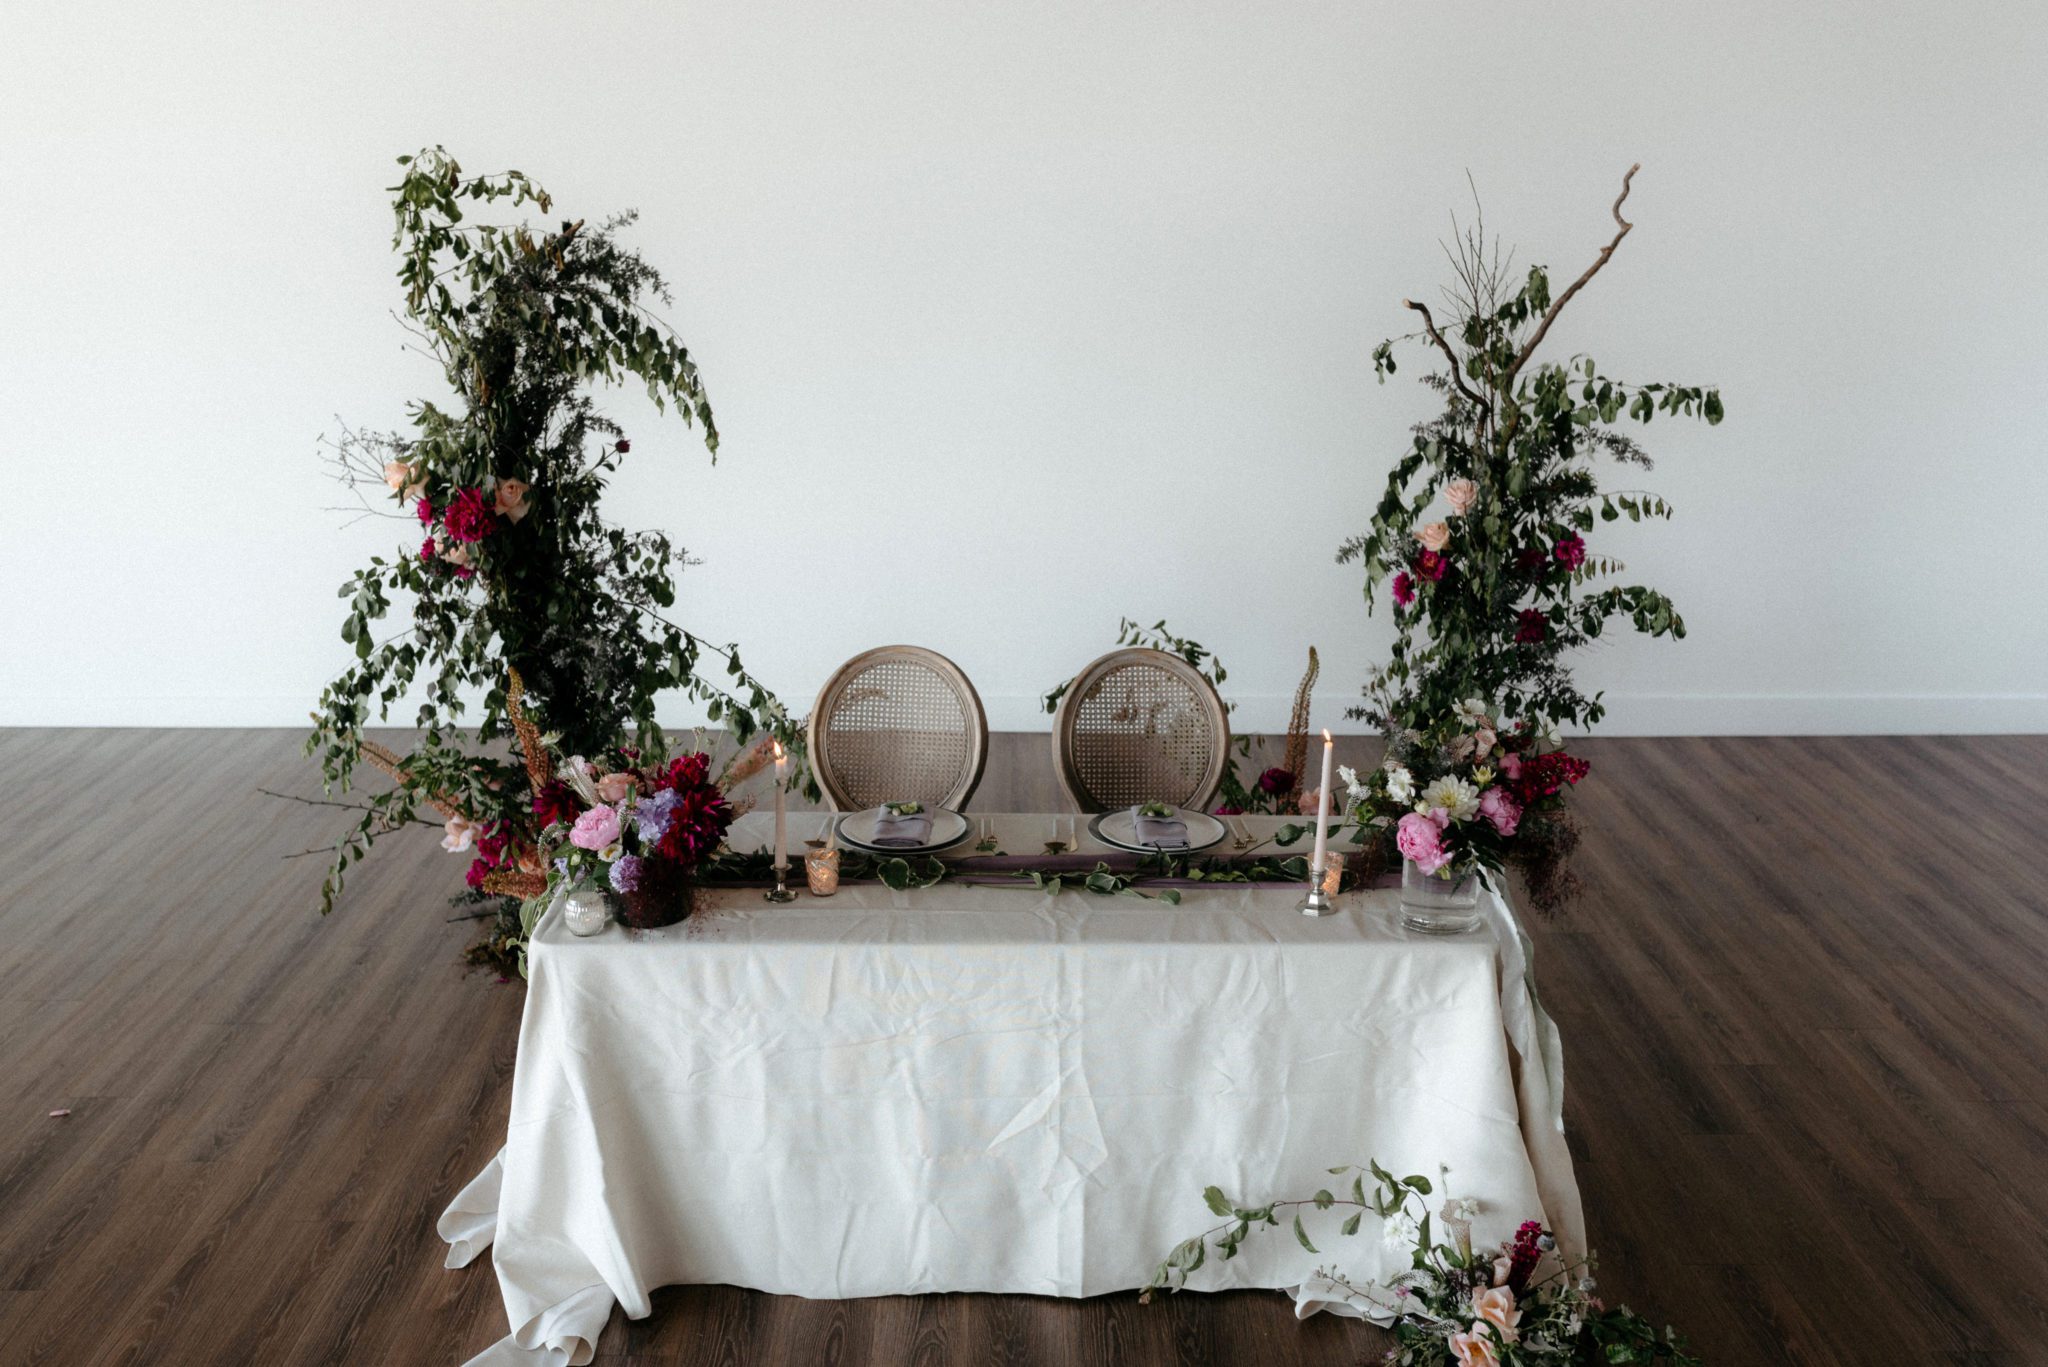 The Perfect Fall Pairing of Plum and Olive Hues in this Wallace Venue Wedding Inspiration